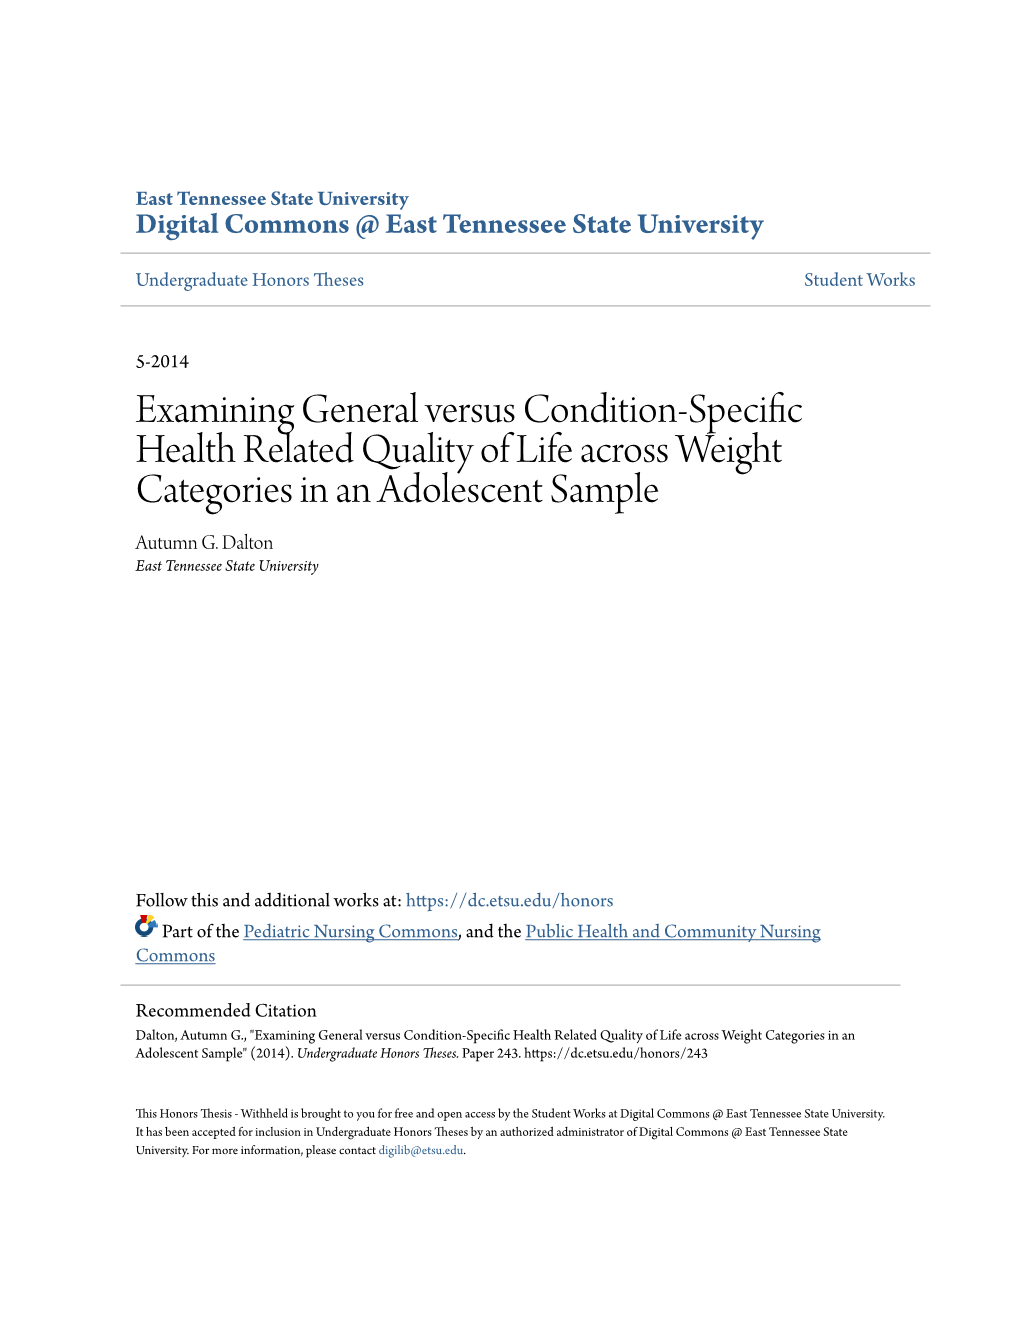 Examining General Versus Condition-Specific Health Related Quality of Life Across Weight Categories in an Adolescent Sample Autumn G